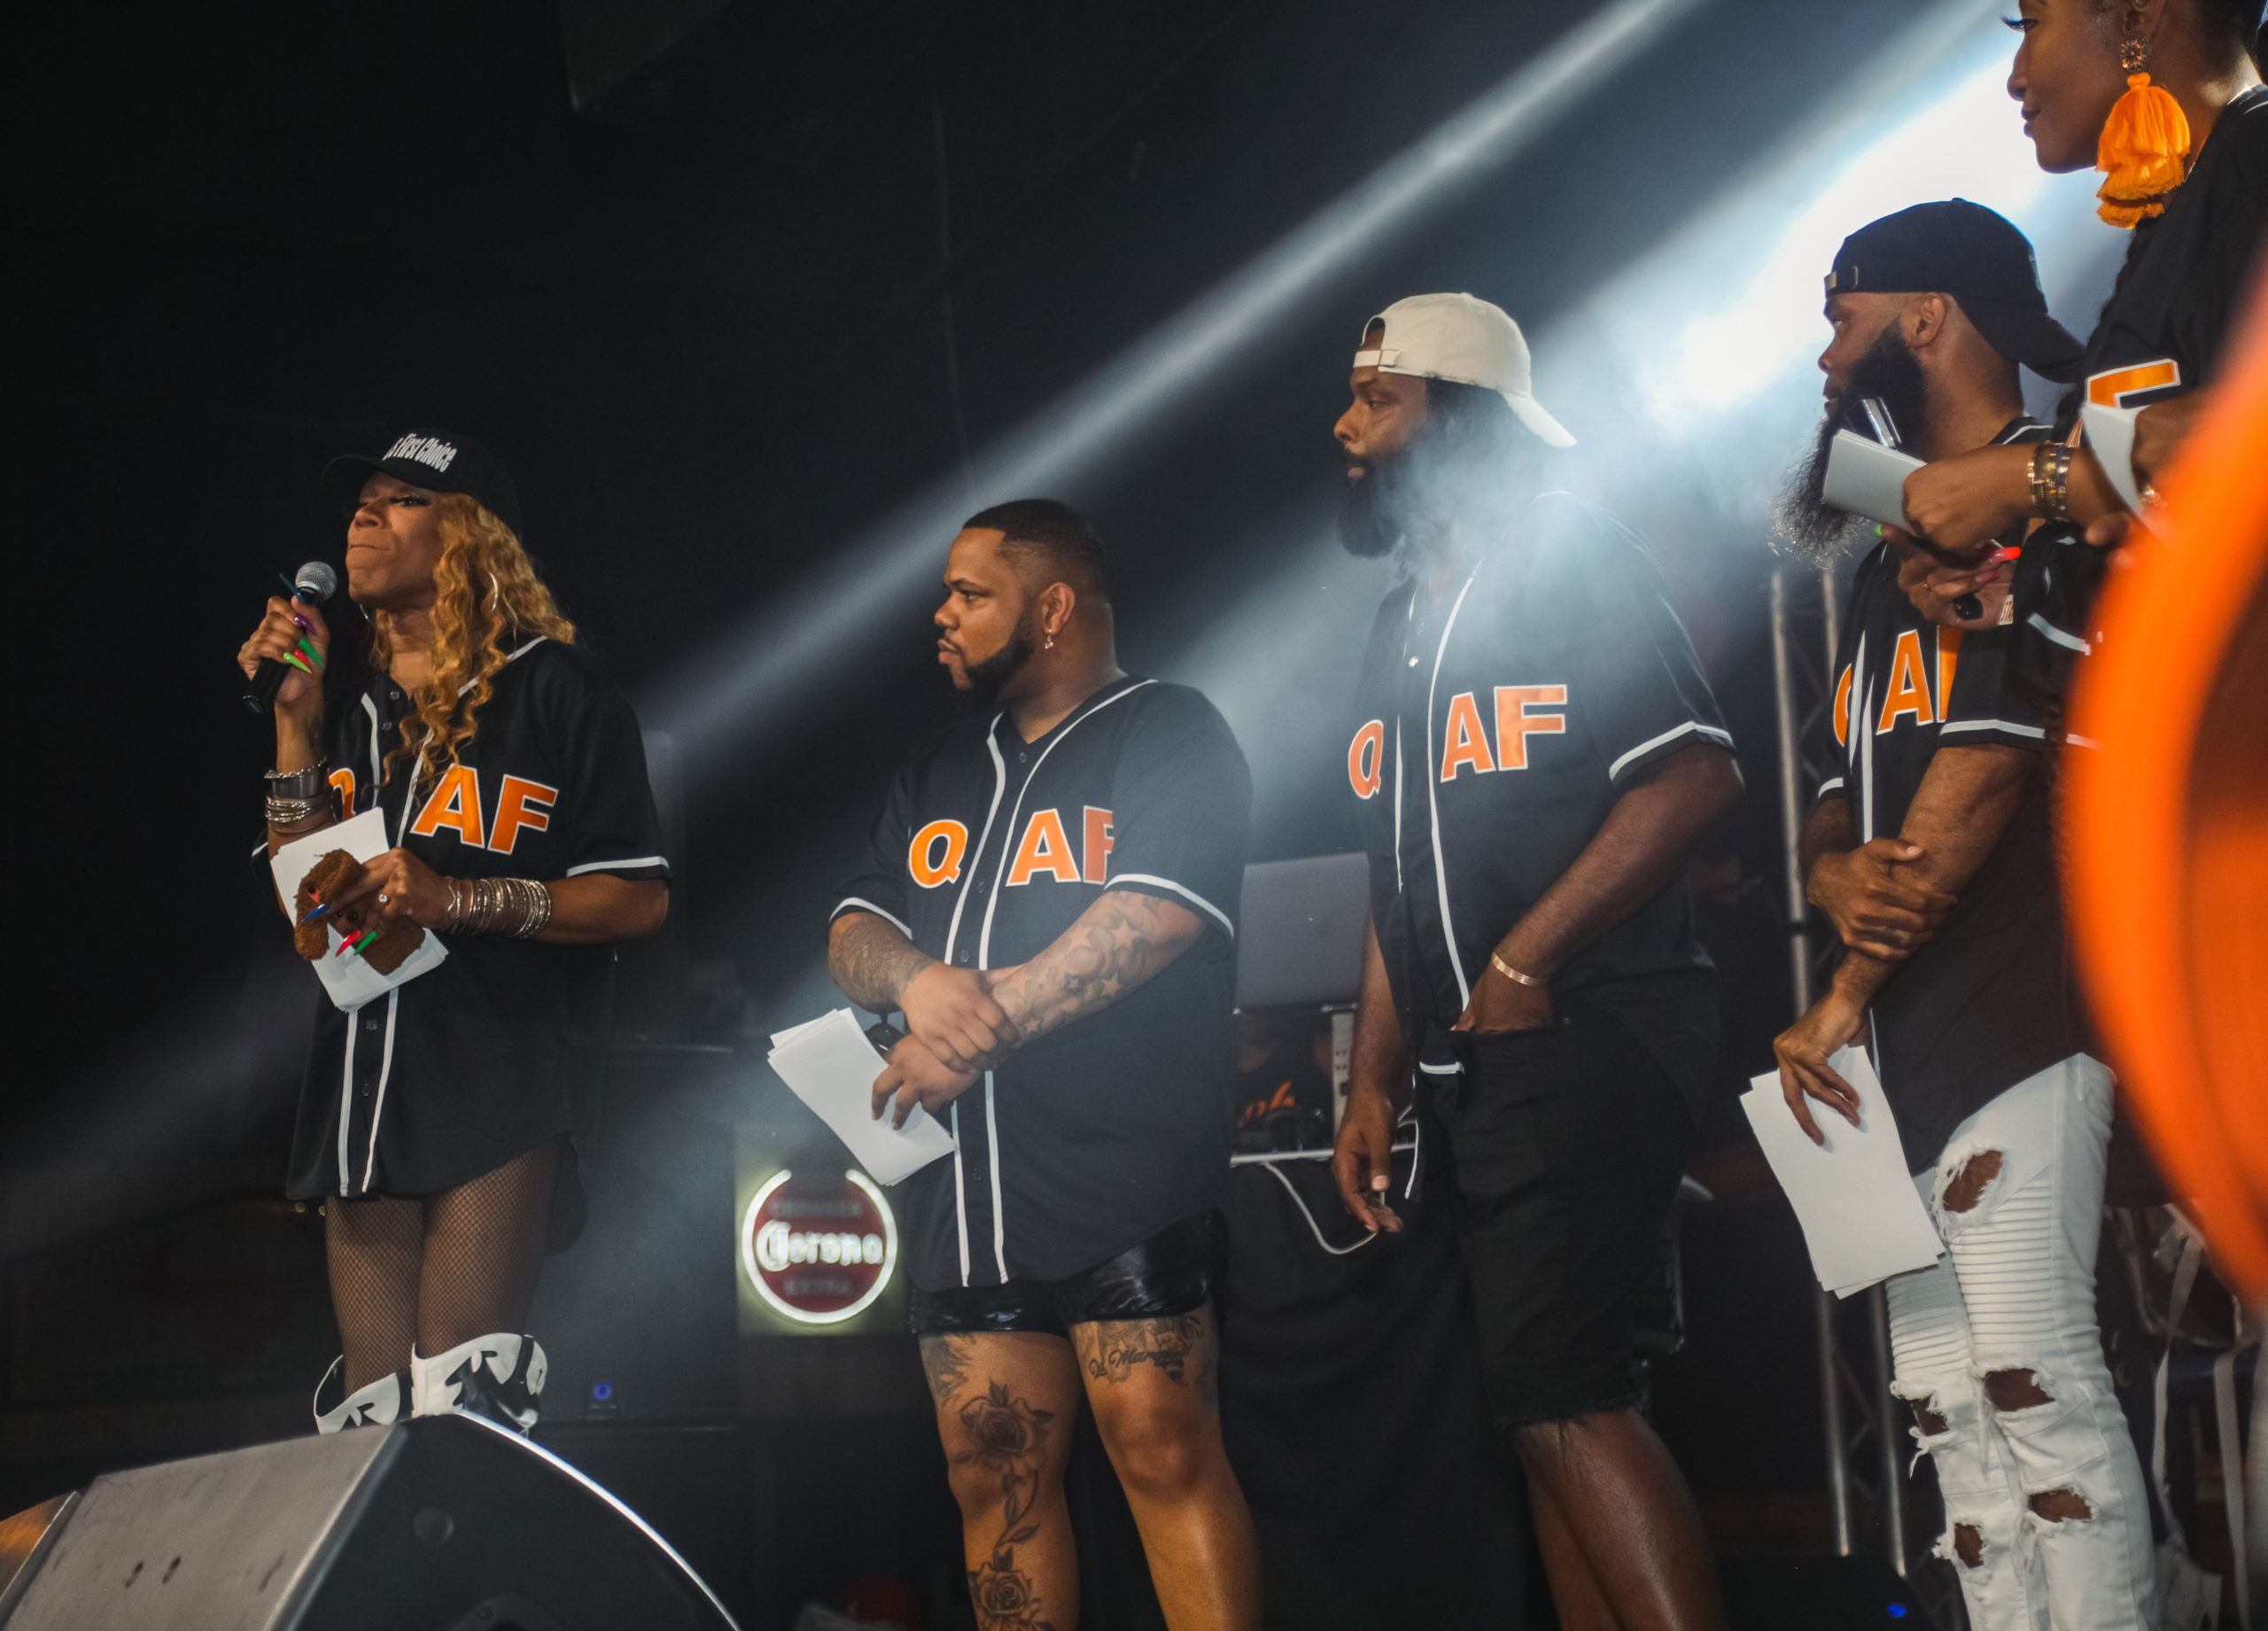 The Black Queer AF Music Festival is an event that is a time to completely center the Black, queer community in music, education, collaboration, and programming. Pictured are some of The Normal Anomaly Team members on the stage of Black Queer AF Music Festival 2022.